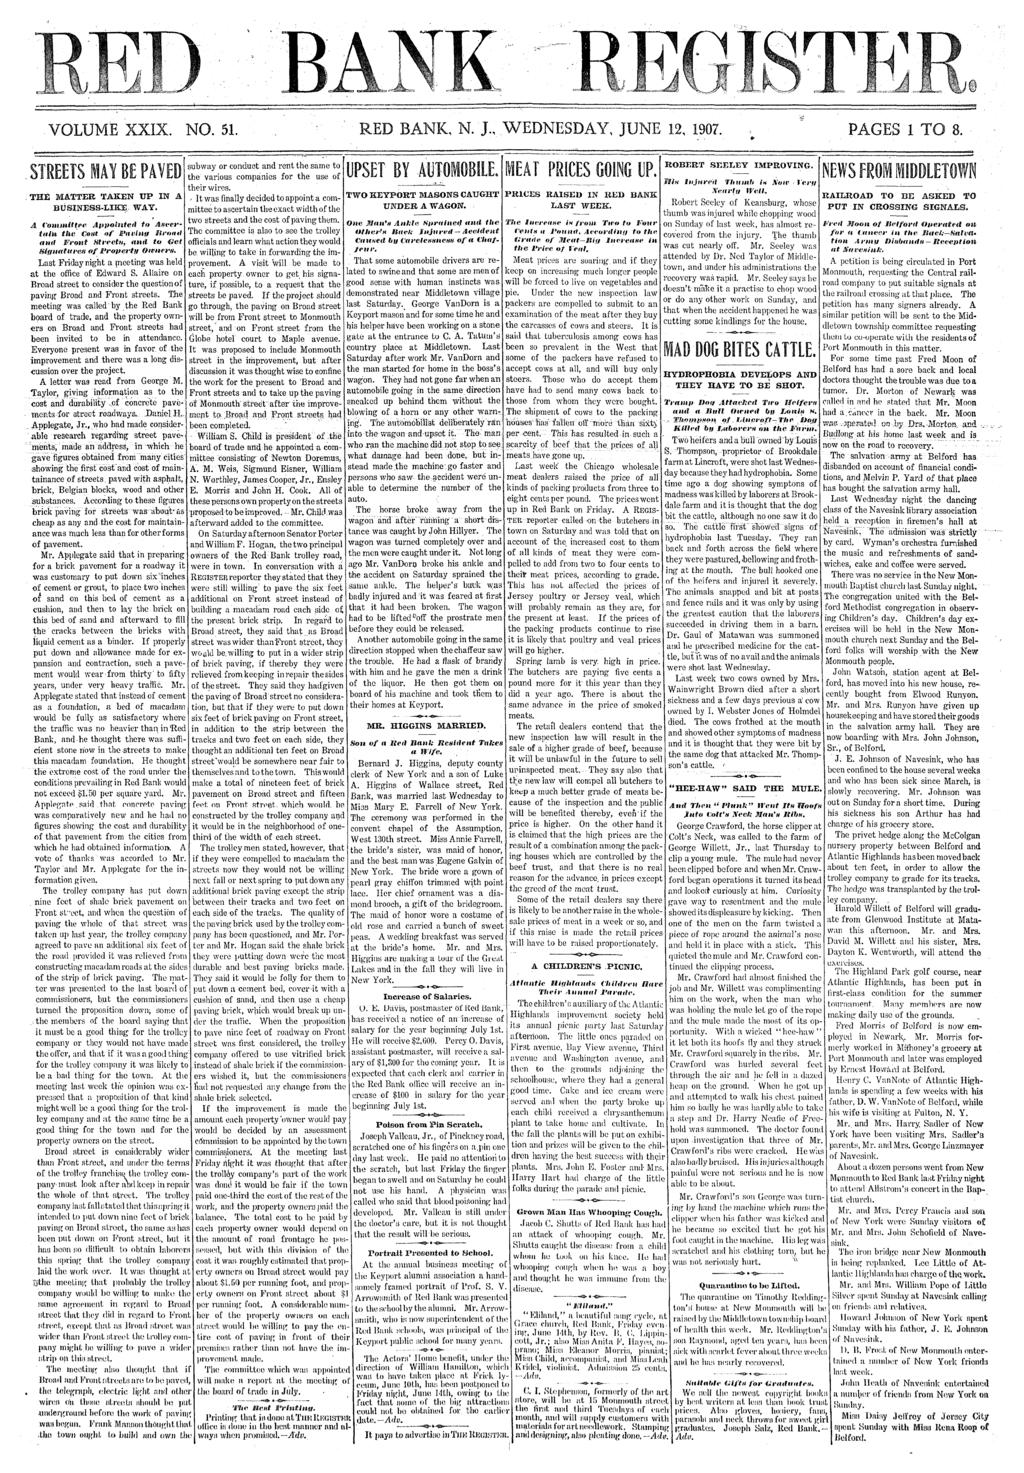 VOLUME XXX. NO. 51. RED BANK, N.J., WEDNESDAY, JUNE 12, 1907. PAGES 1 TO 8..THE MATTER TAKEN UP N A BUSNESS-LKE;, WAY.